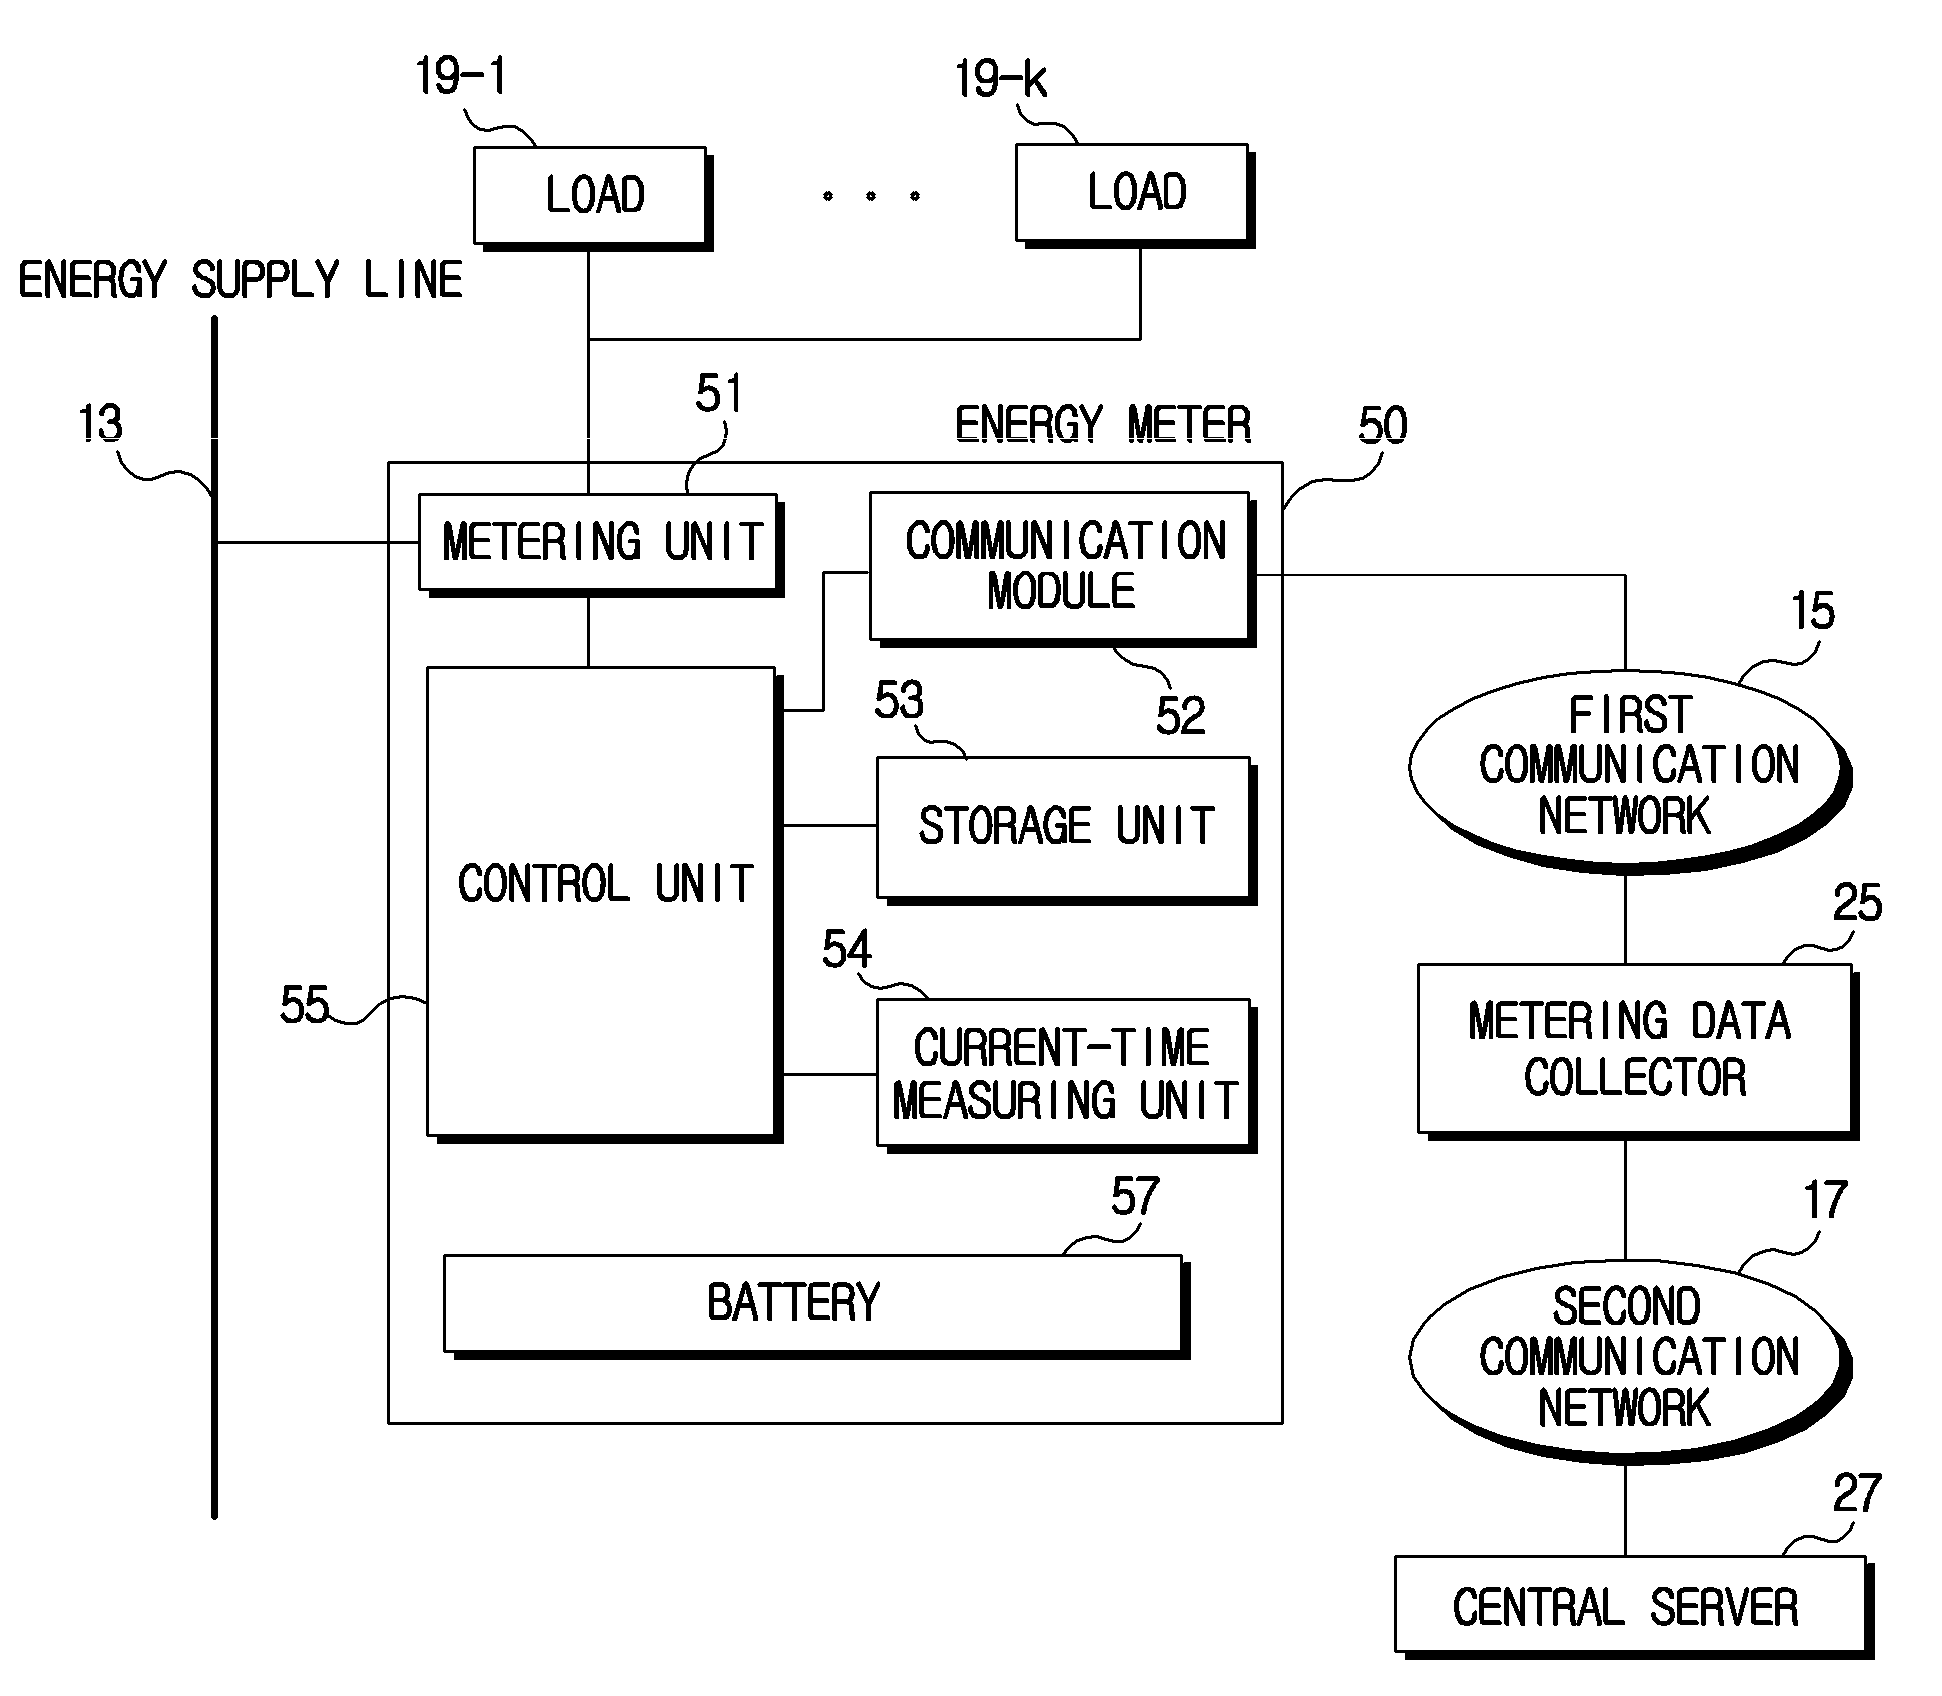 Sampling energy meter reading system using demand response of energy prices for a power saving mode